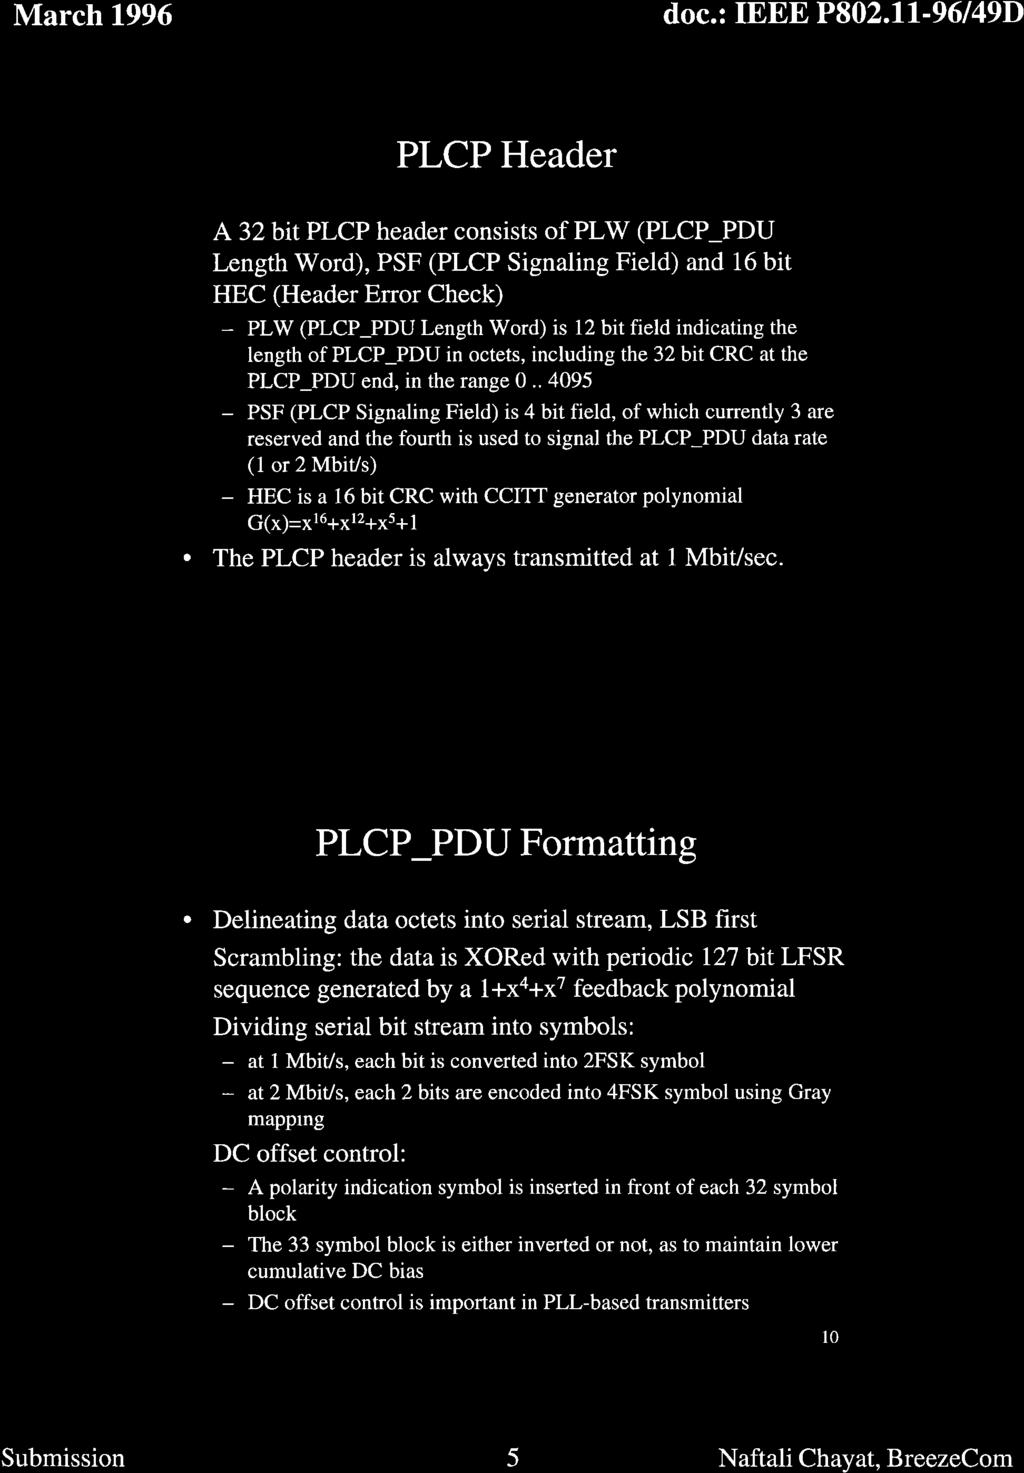 PLCPHeader A 32 bit PLCP header consists of PL W (PLCP _PDU Length Word), PSF (PLCP Signaling Field) and 16 bit HEC (Header Error Check) - PLW (PLCP _PDU Length Word) is 12 bit field indicating the